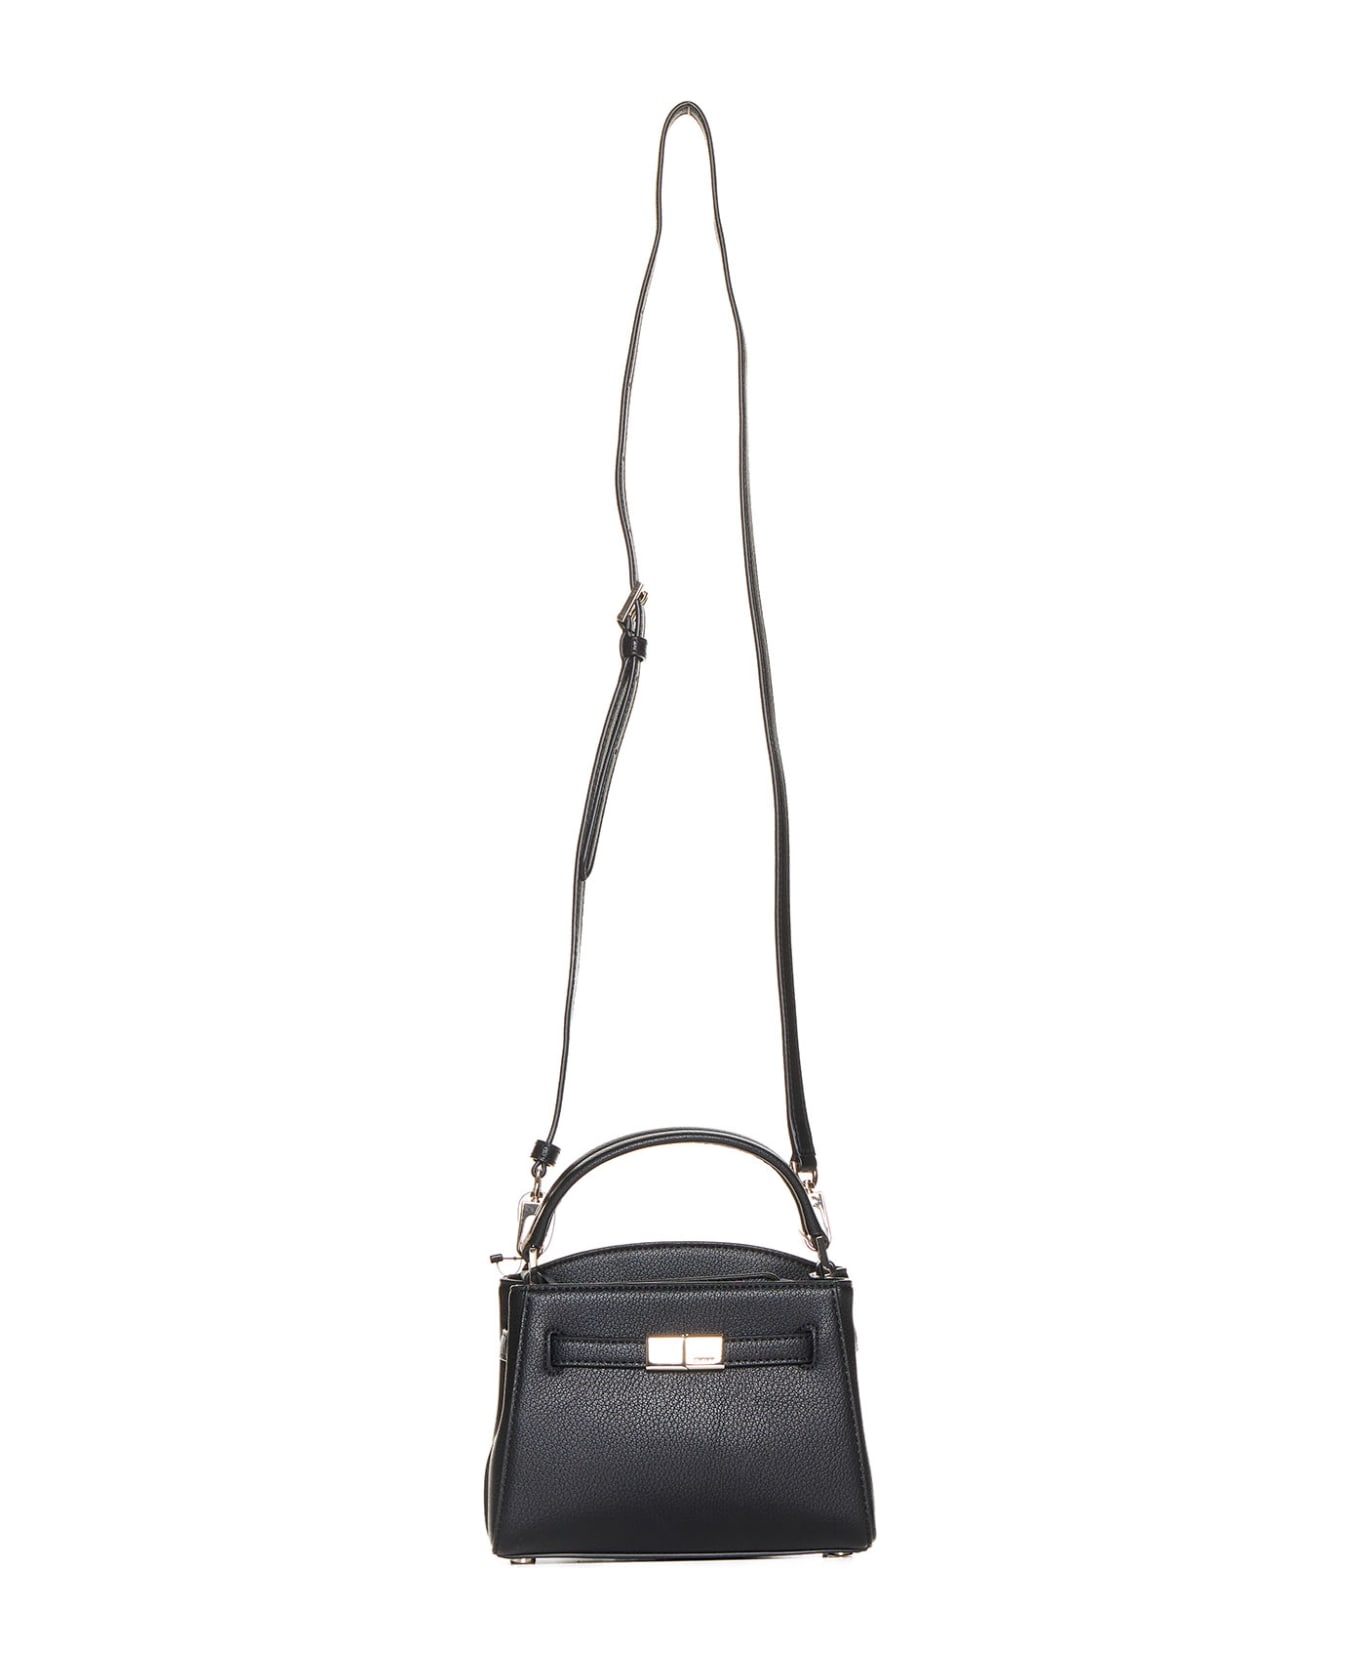 DKNY Tote - Black/gold トートバッグ